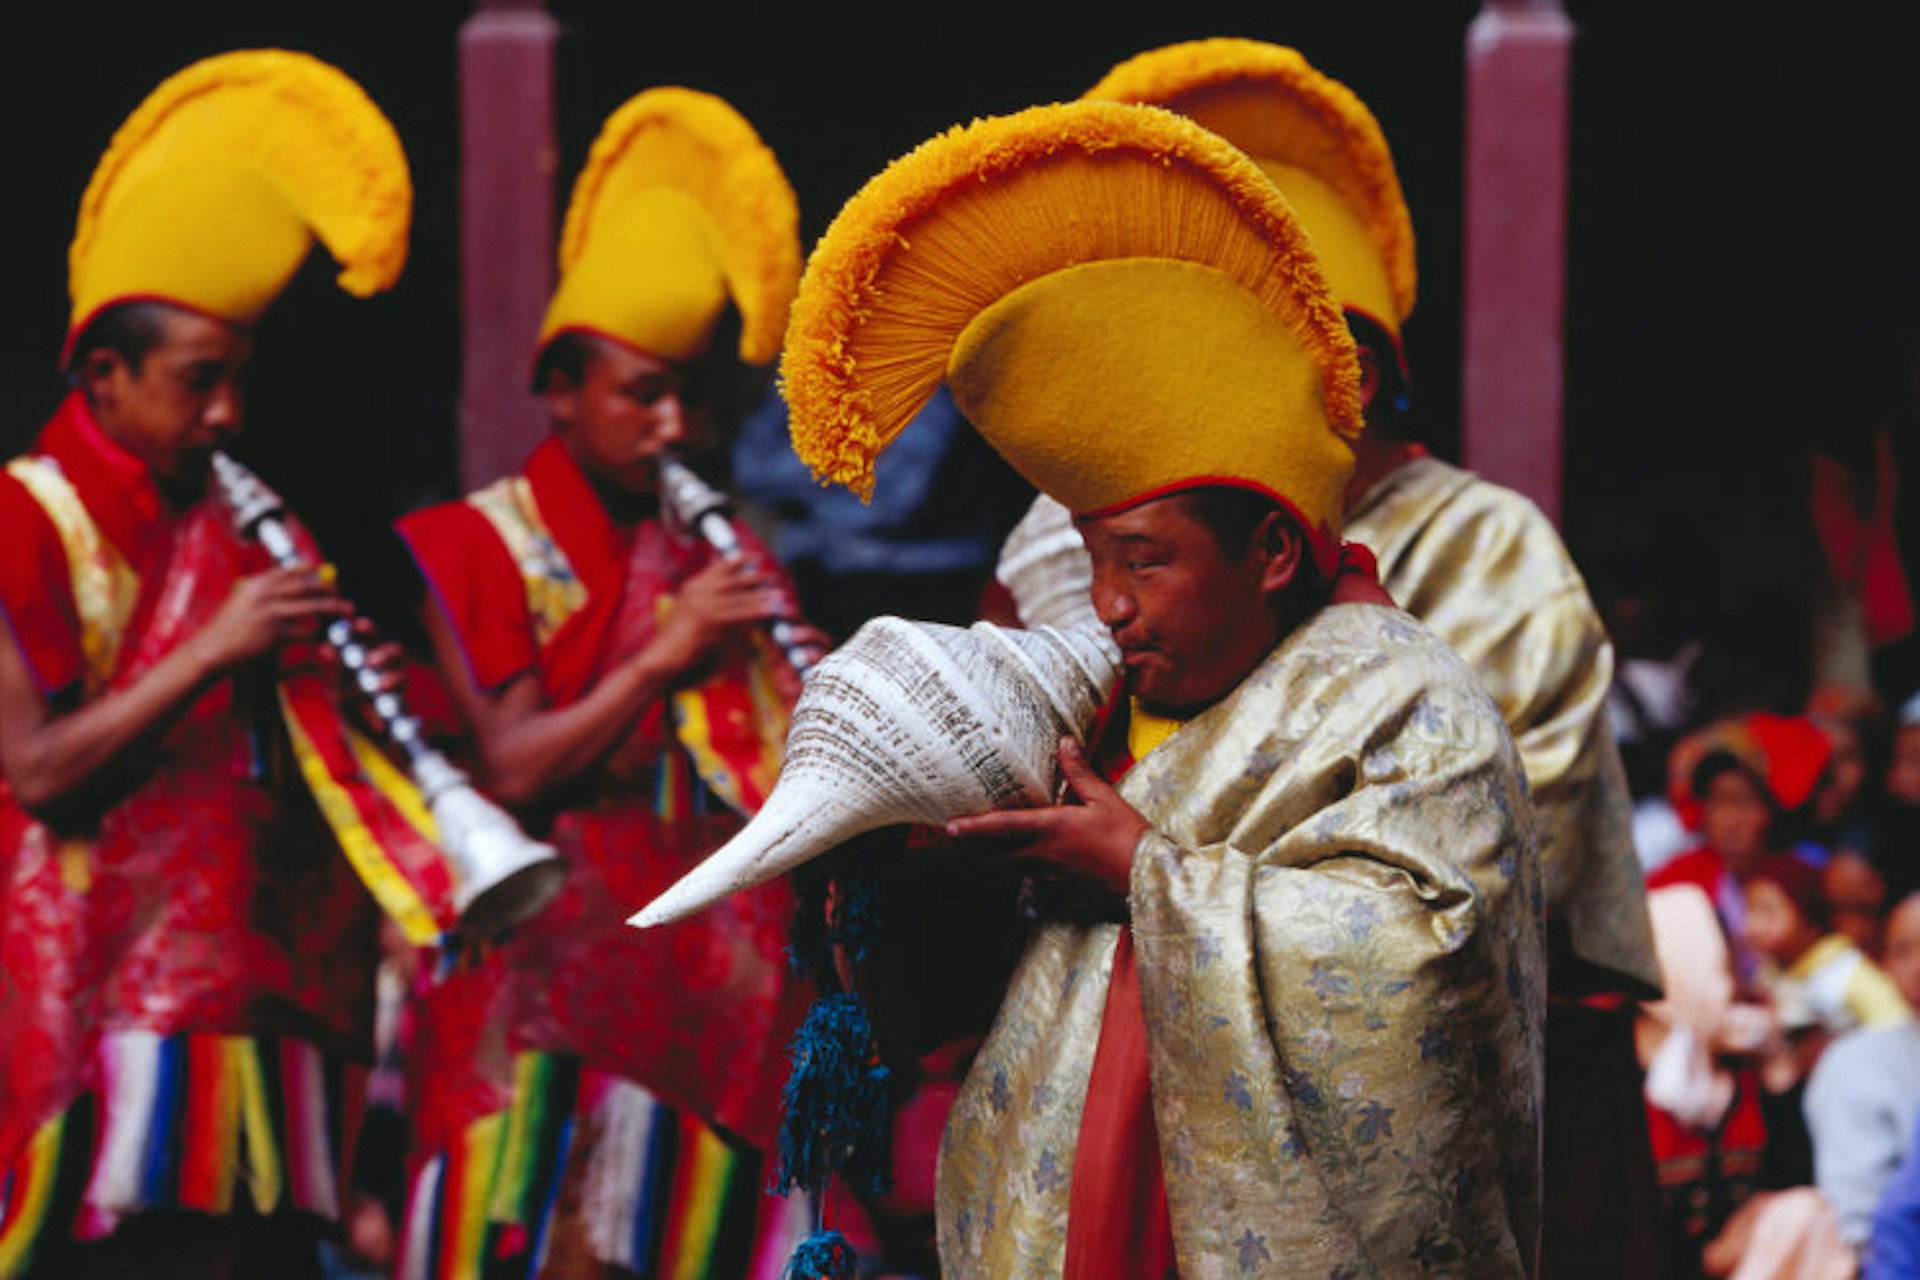 Monks sounding conch shells at Mani Rimdu festival. Image by Richard I'Anson / Getty Images.